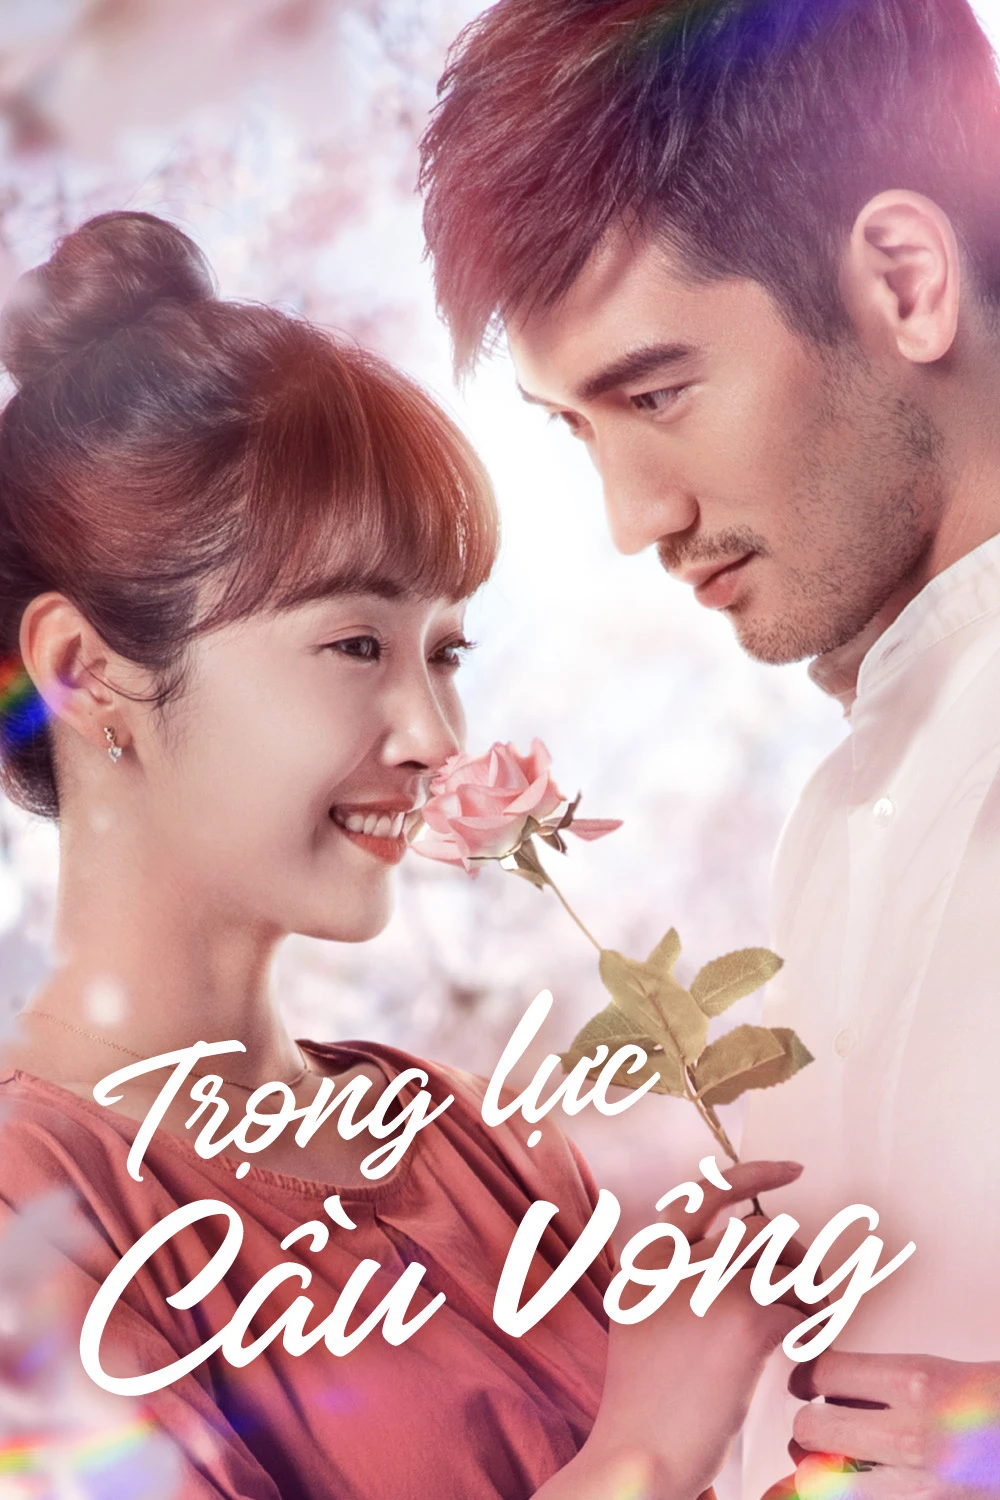 Trọng Lực Cầu Vồng | The Gravity Of The Rainbow (2019)